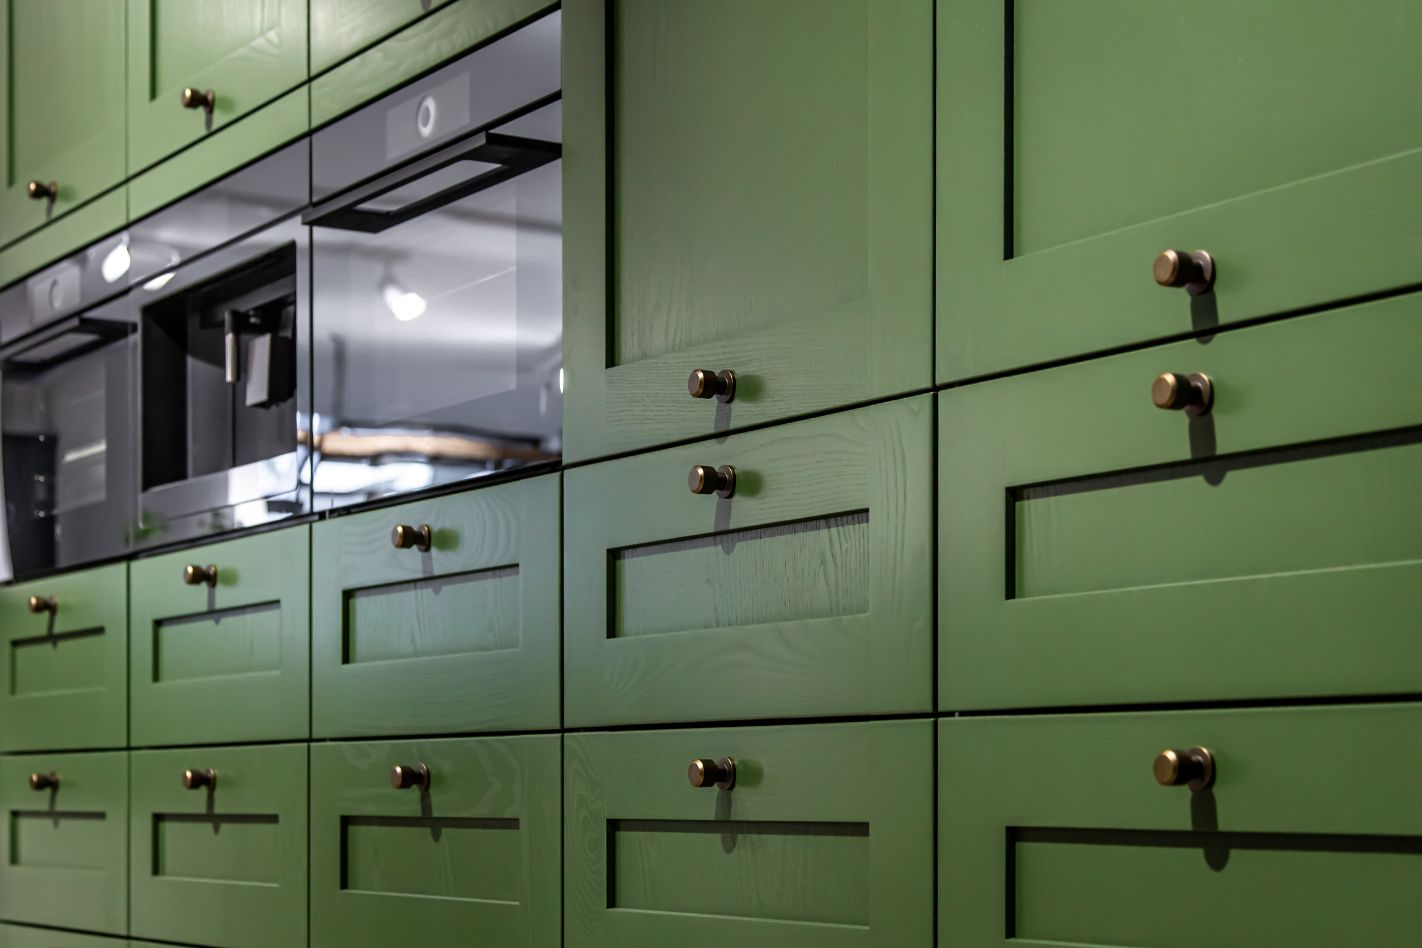 green painted cabinets